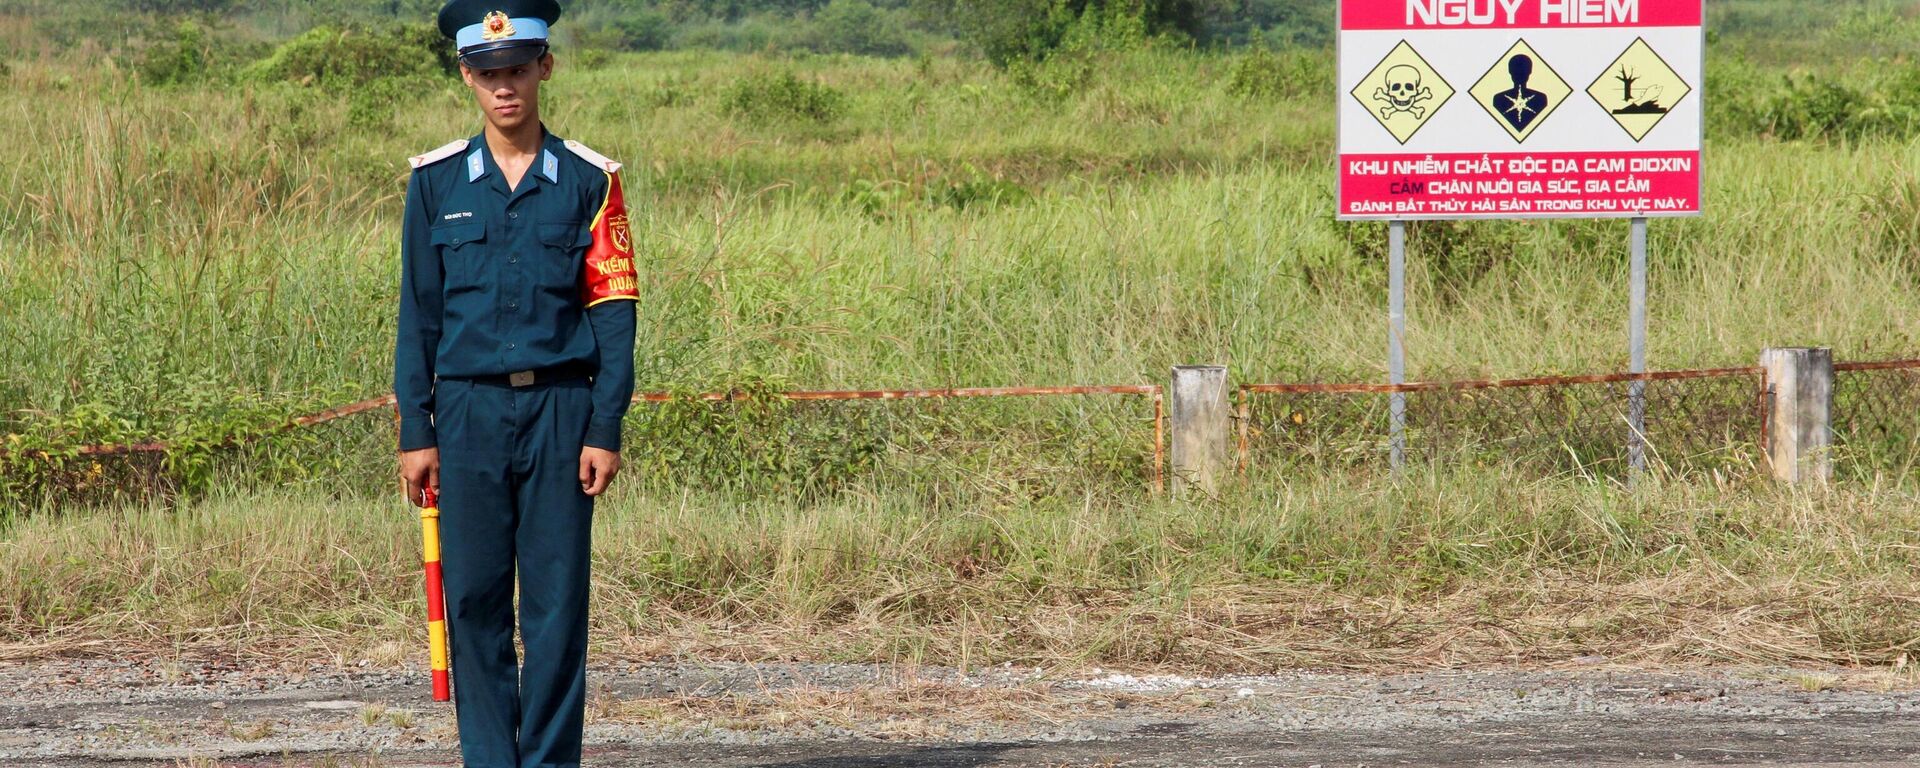 A Vietnamese soldier stands next to a hazardous warning sign by a runway at Bien Hoa air base, on the outskirts of Ho Chi Minh City, as US Defence Secretary Jim Mattis visits the former US air base on October 17, 2018 - Sputnik International, 1920, 10.08.2022